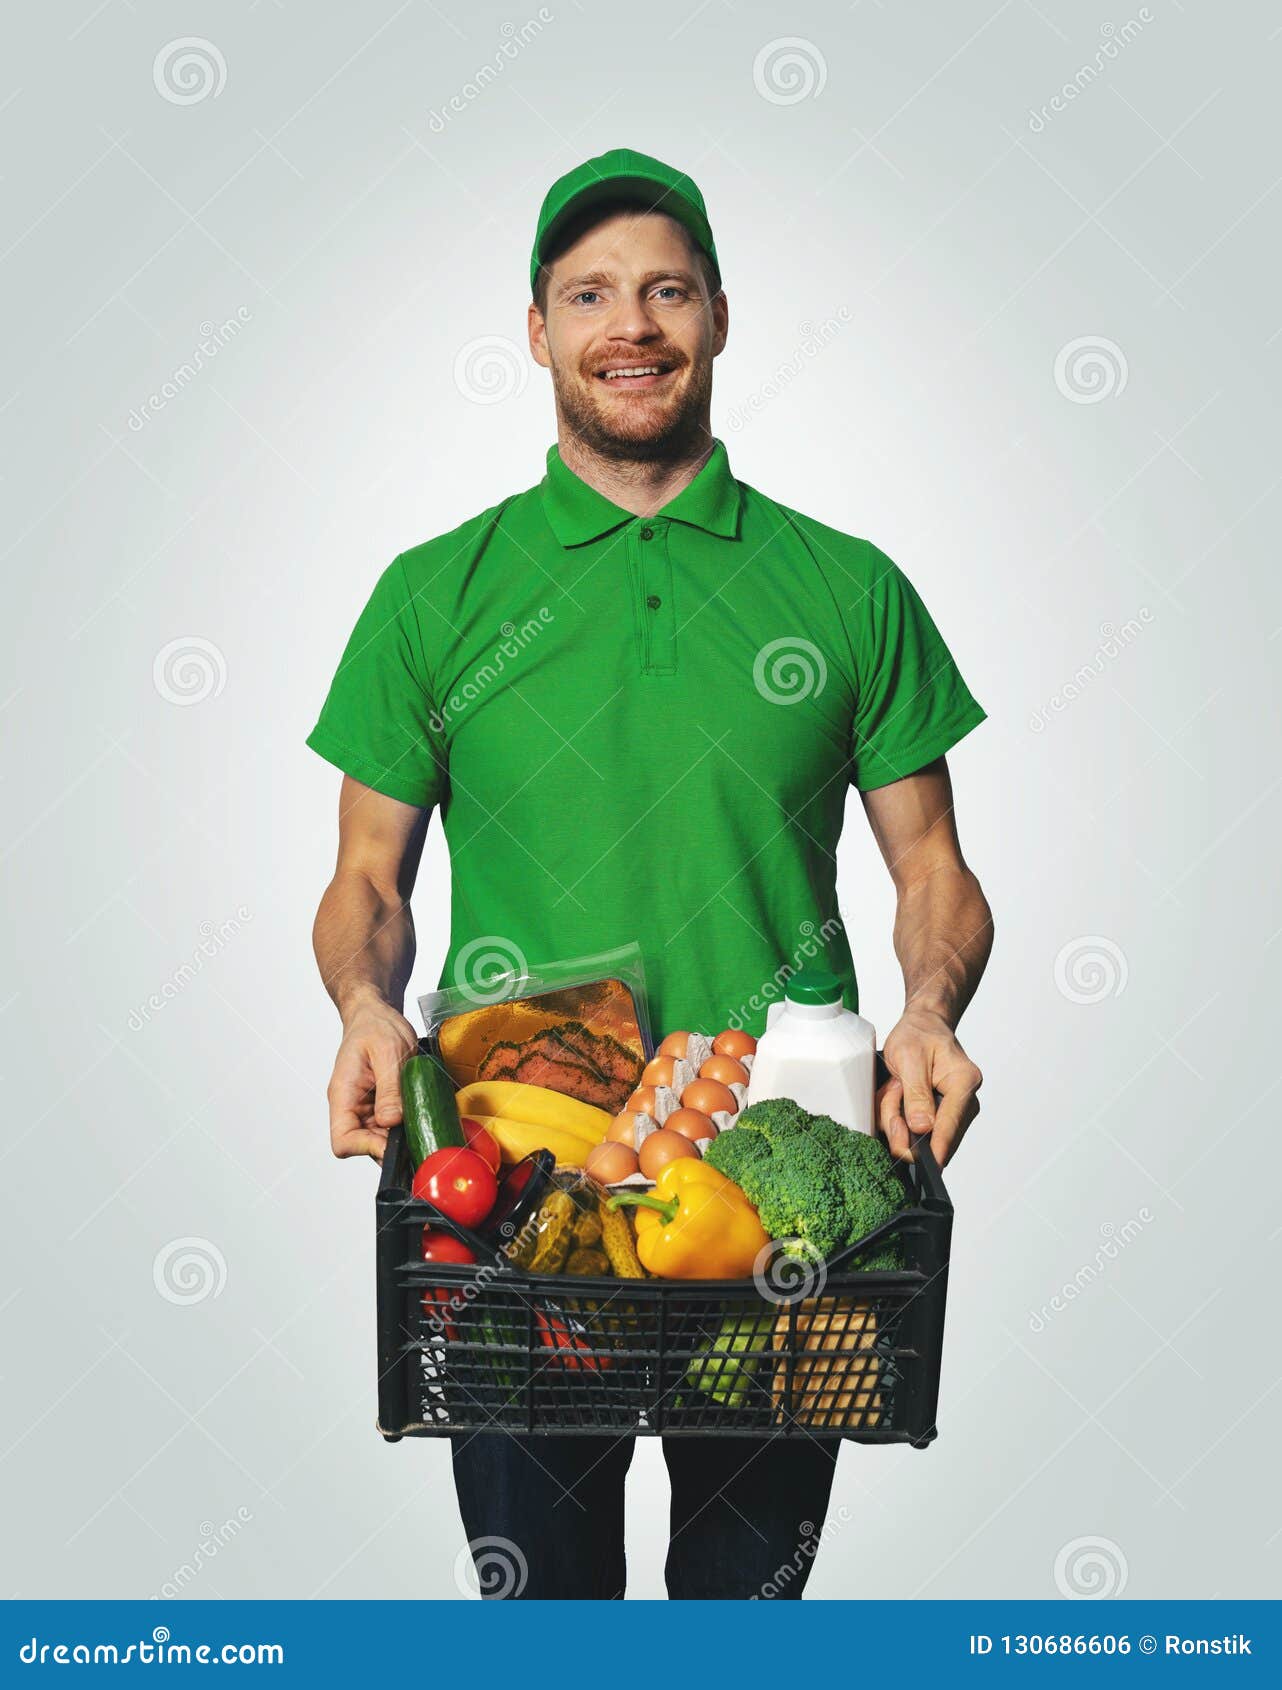 groceries delivery - man in green uniform with food box